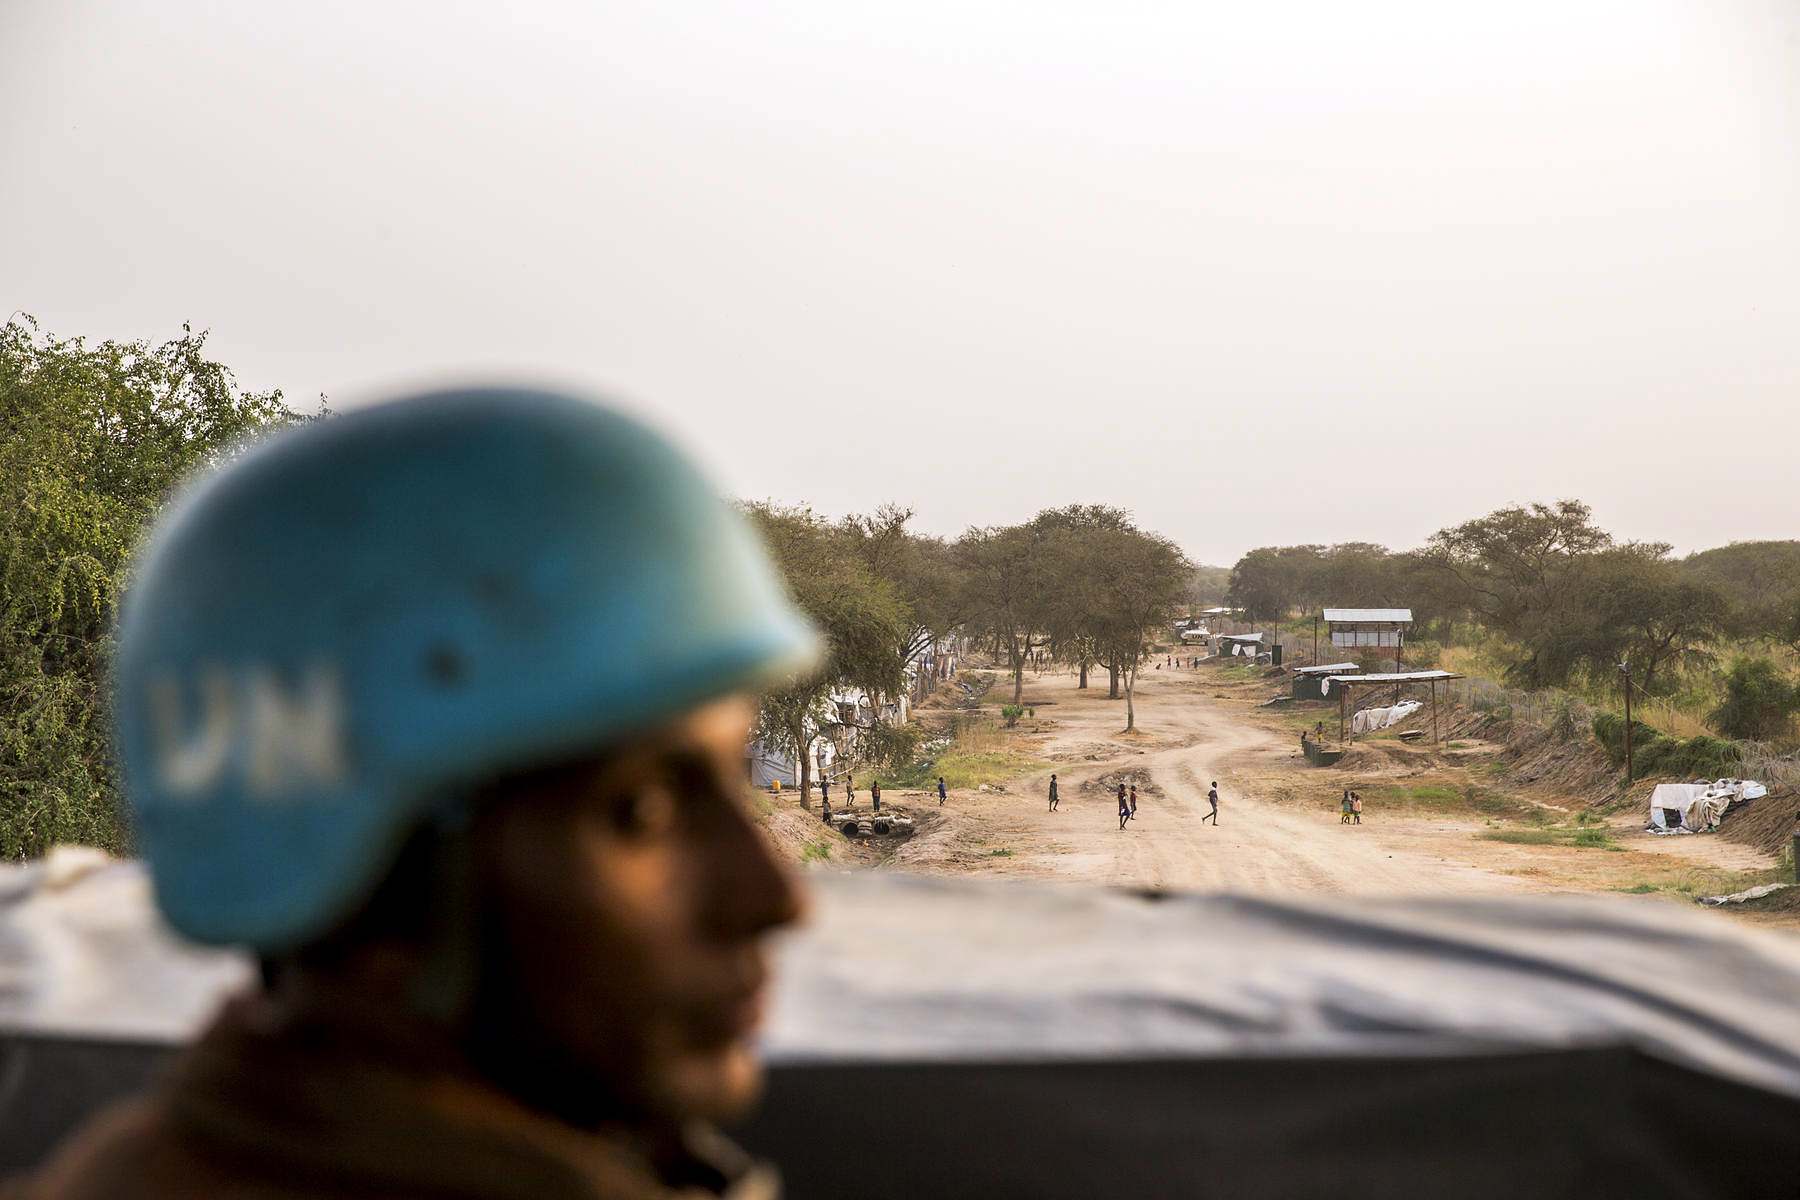 Peacekeepers with the United Nations Mission in South Sudan (UNMISS), on patrol close to the Protection of Civilians site in Bor, South Sudan